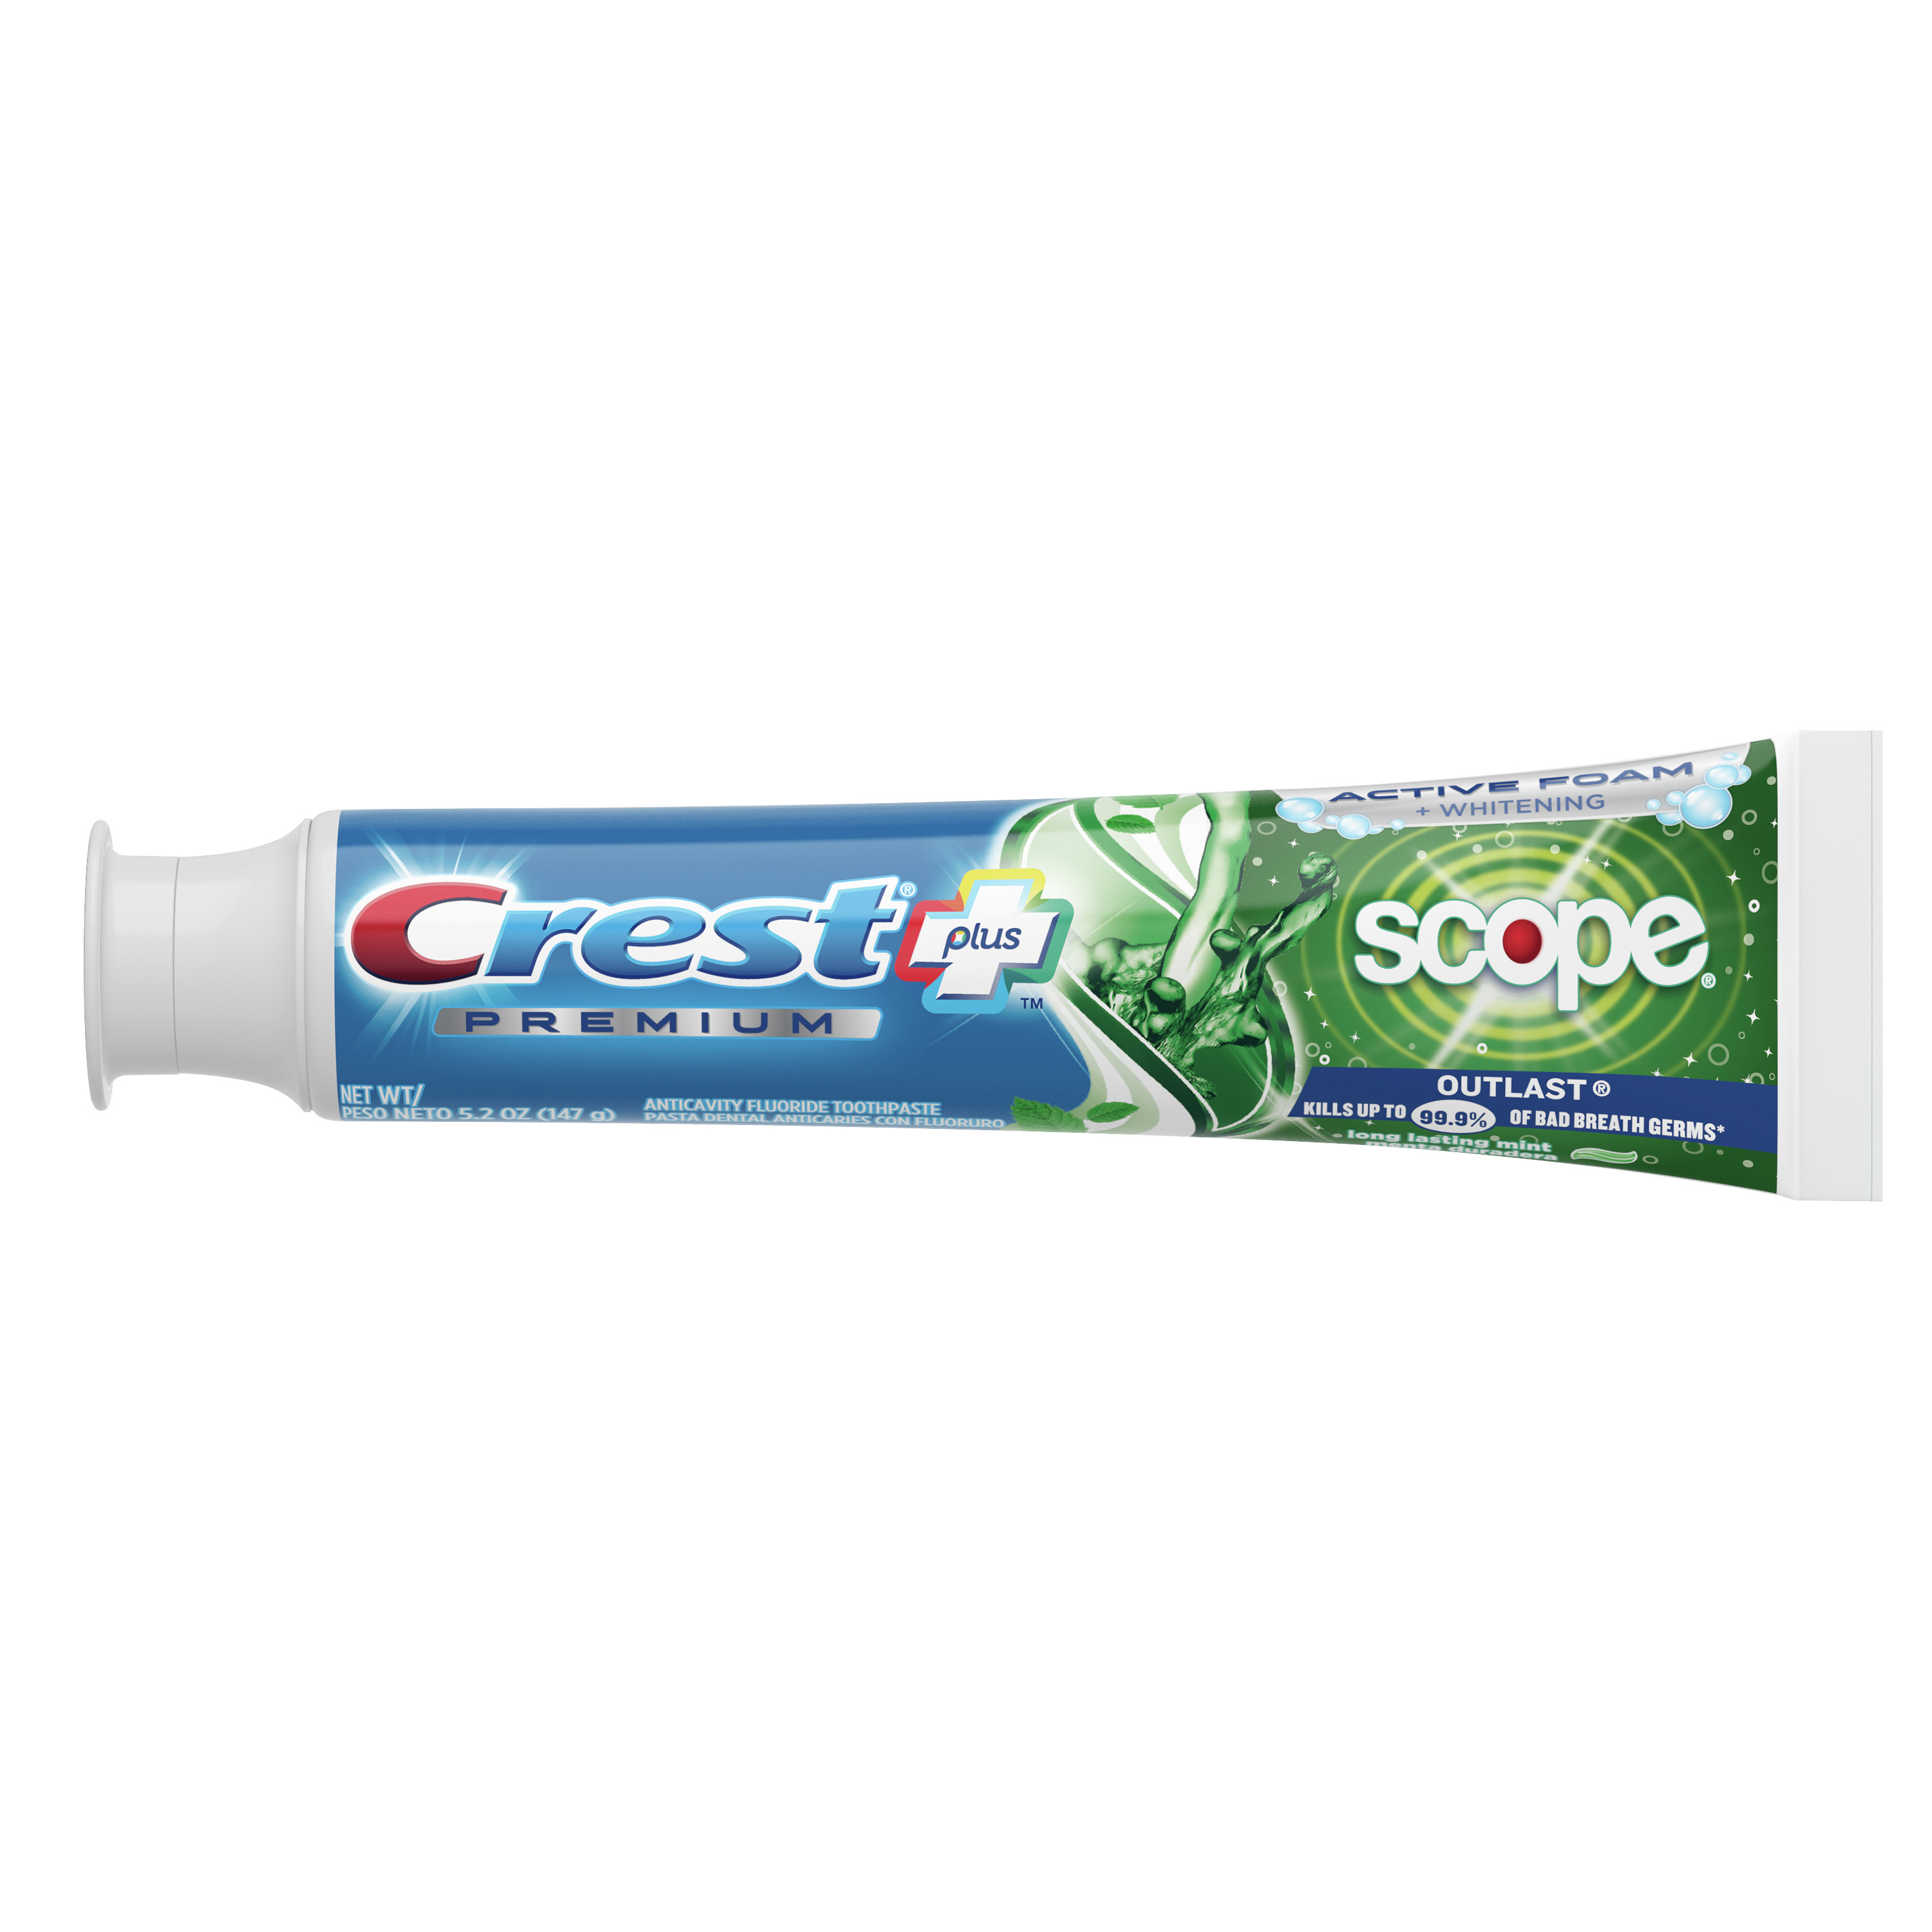 Crest Premium Plus Scope Outlast Toothpaste, Long Lasting Mint Flavor 5.2 oz, Pack of 3 - image 10 of 10